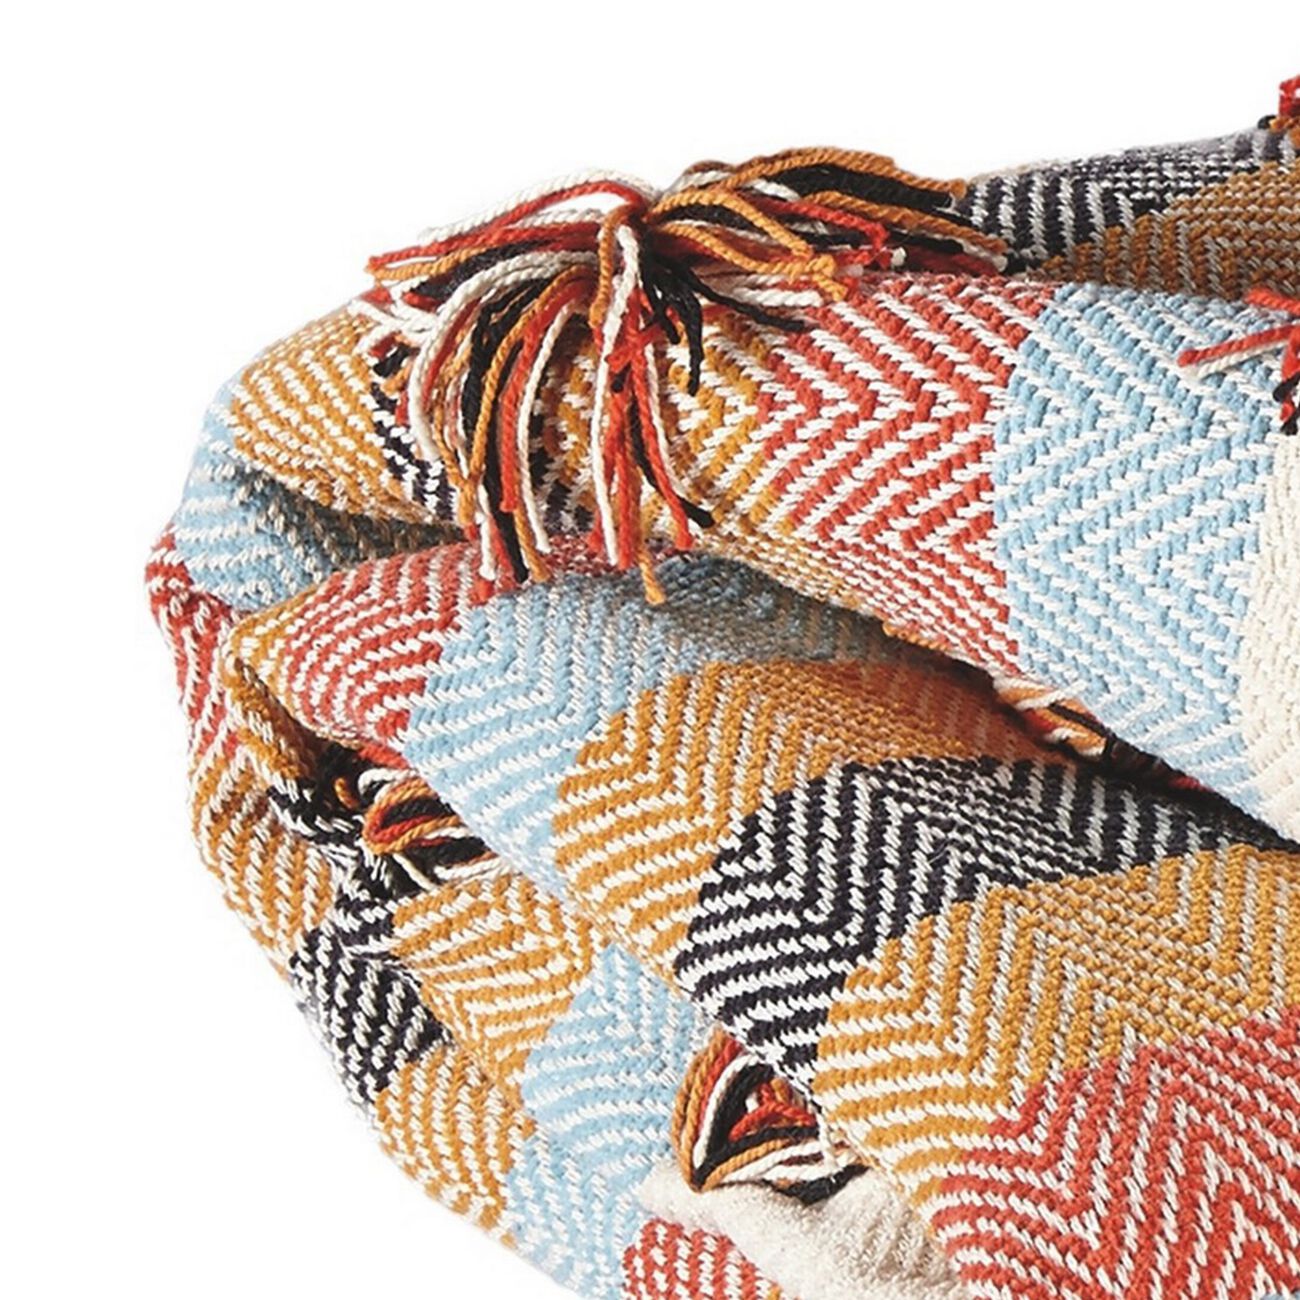 60 x 50 Cotton Throw with Fringe Details, Set of 3, Multicolor